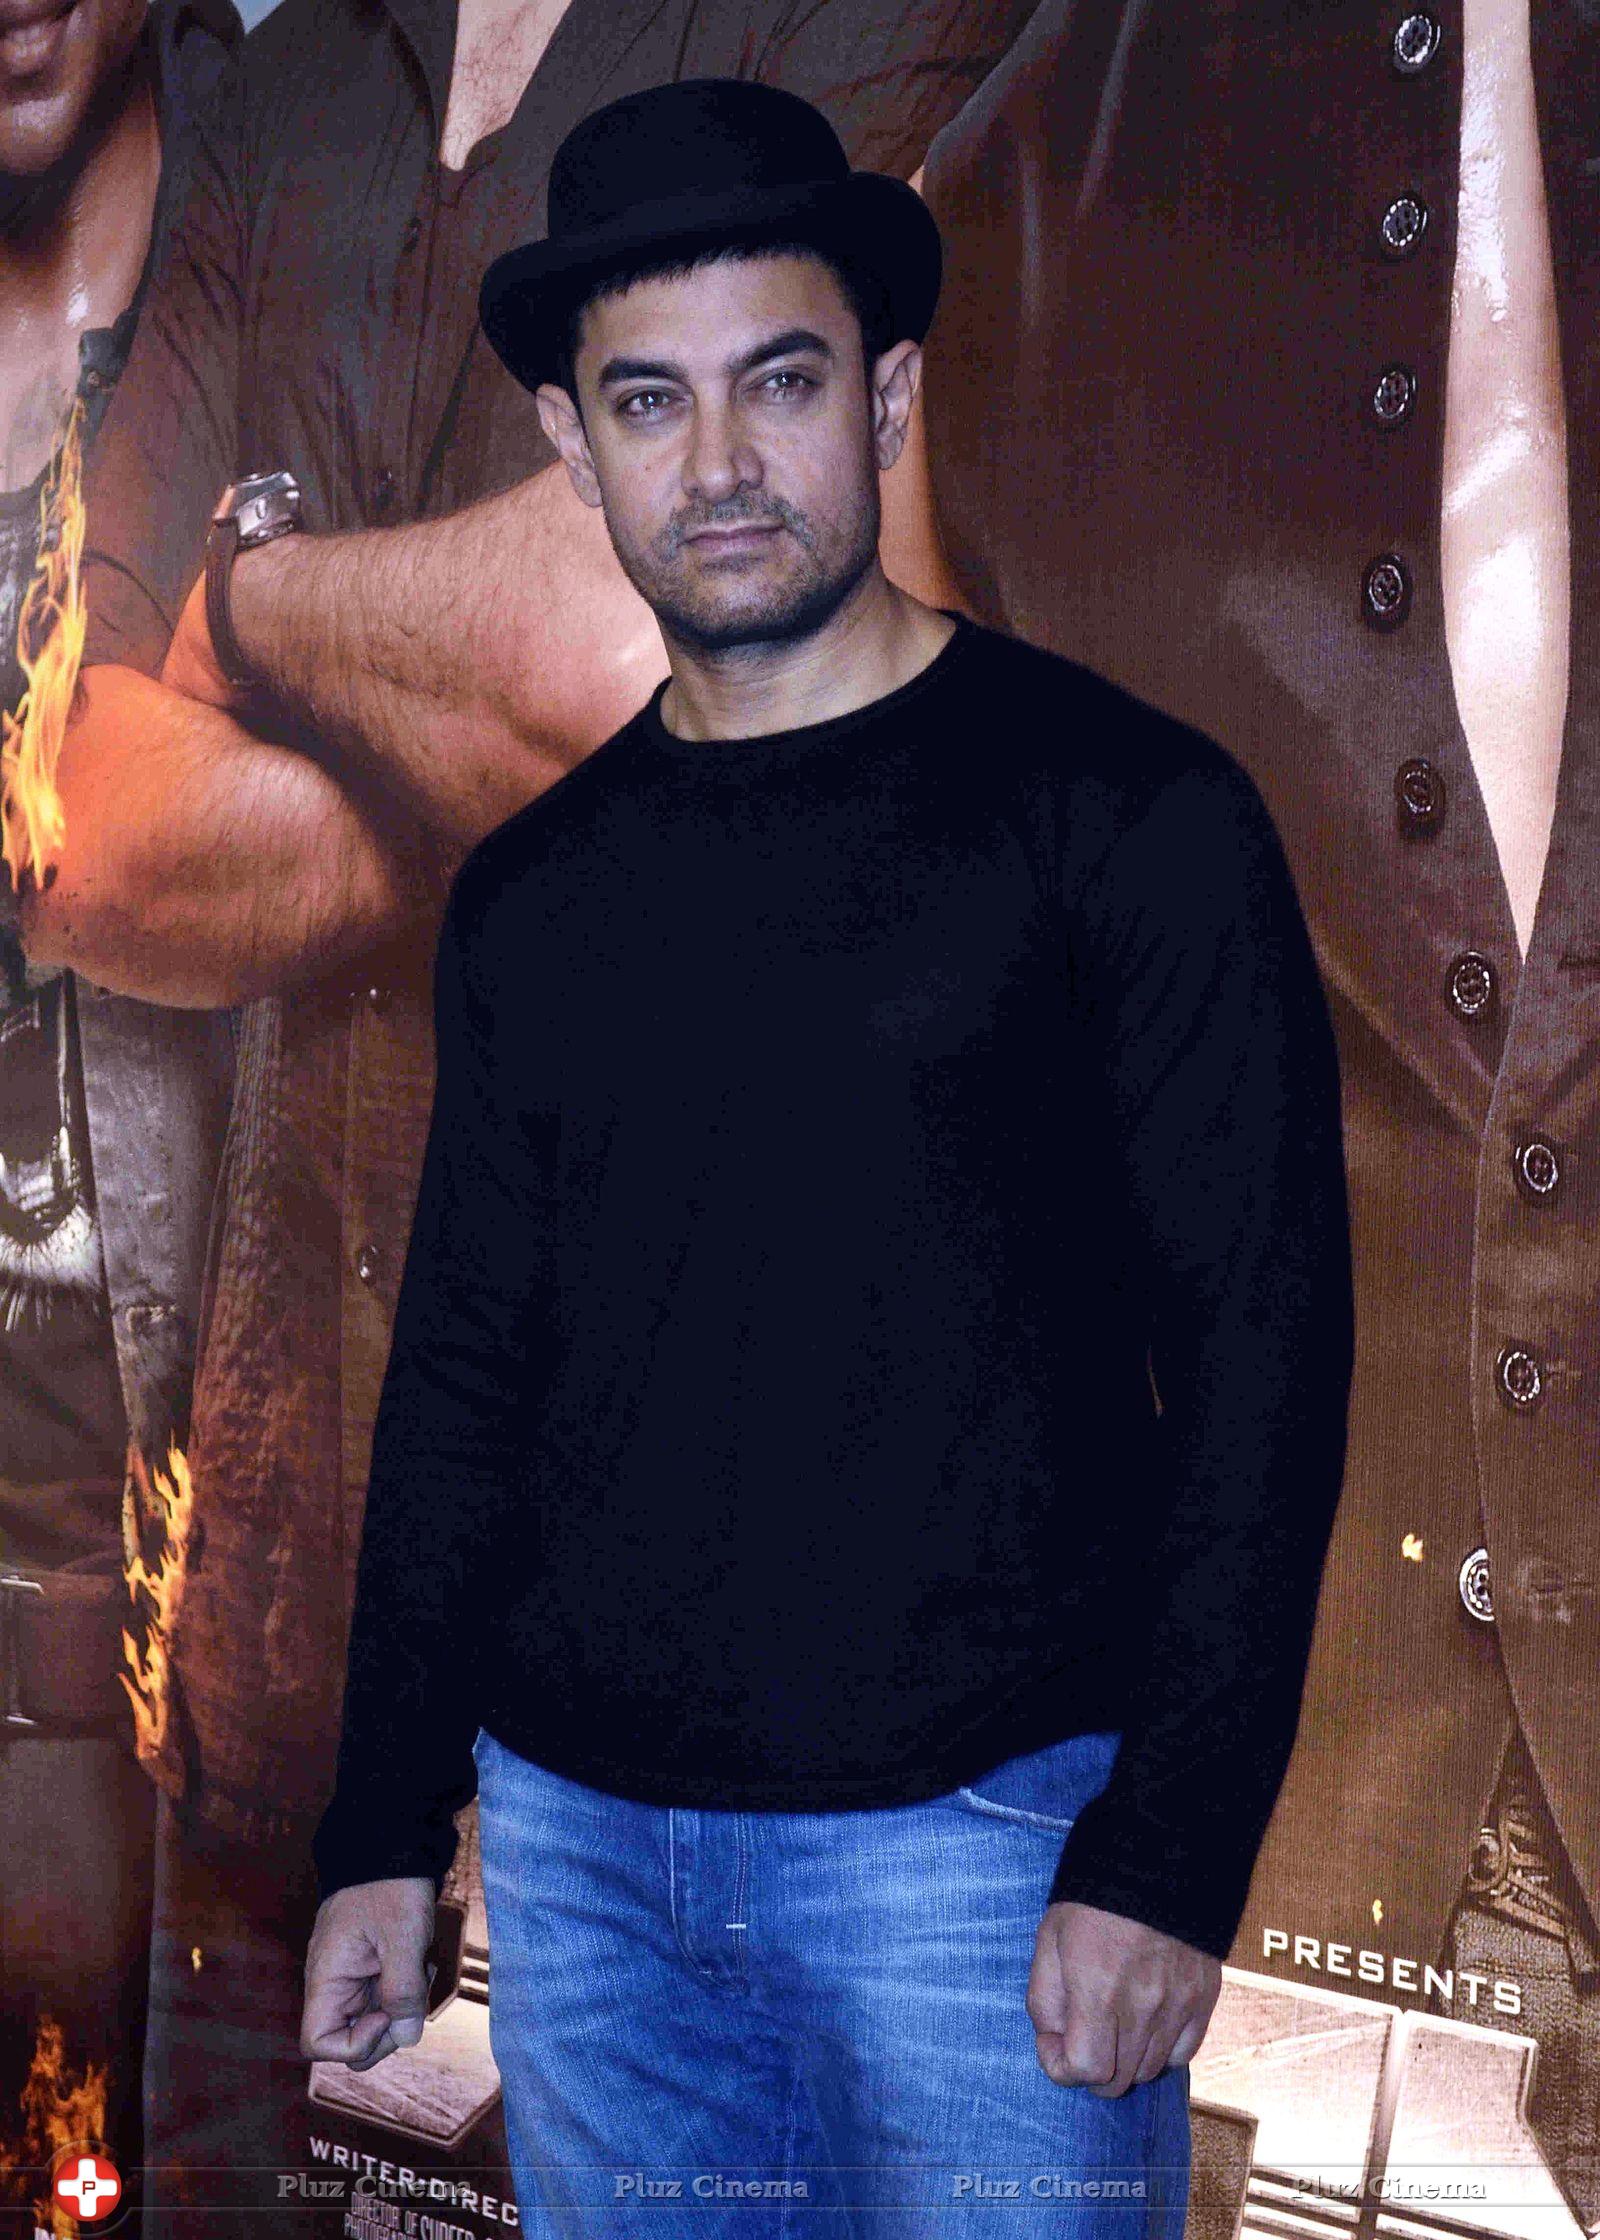 Aamir Khan - Aamir Khan press conference on Dhoom 3 Ticket Prices Photos | Picture 682325